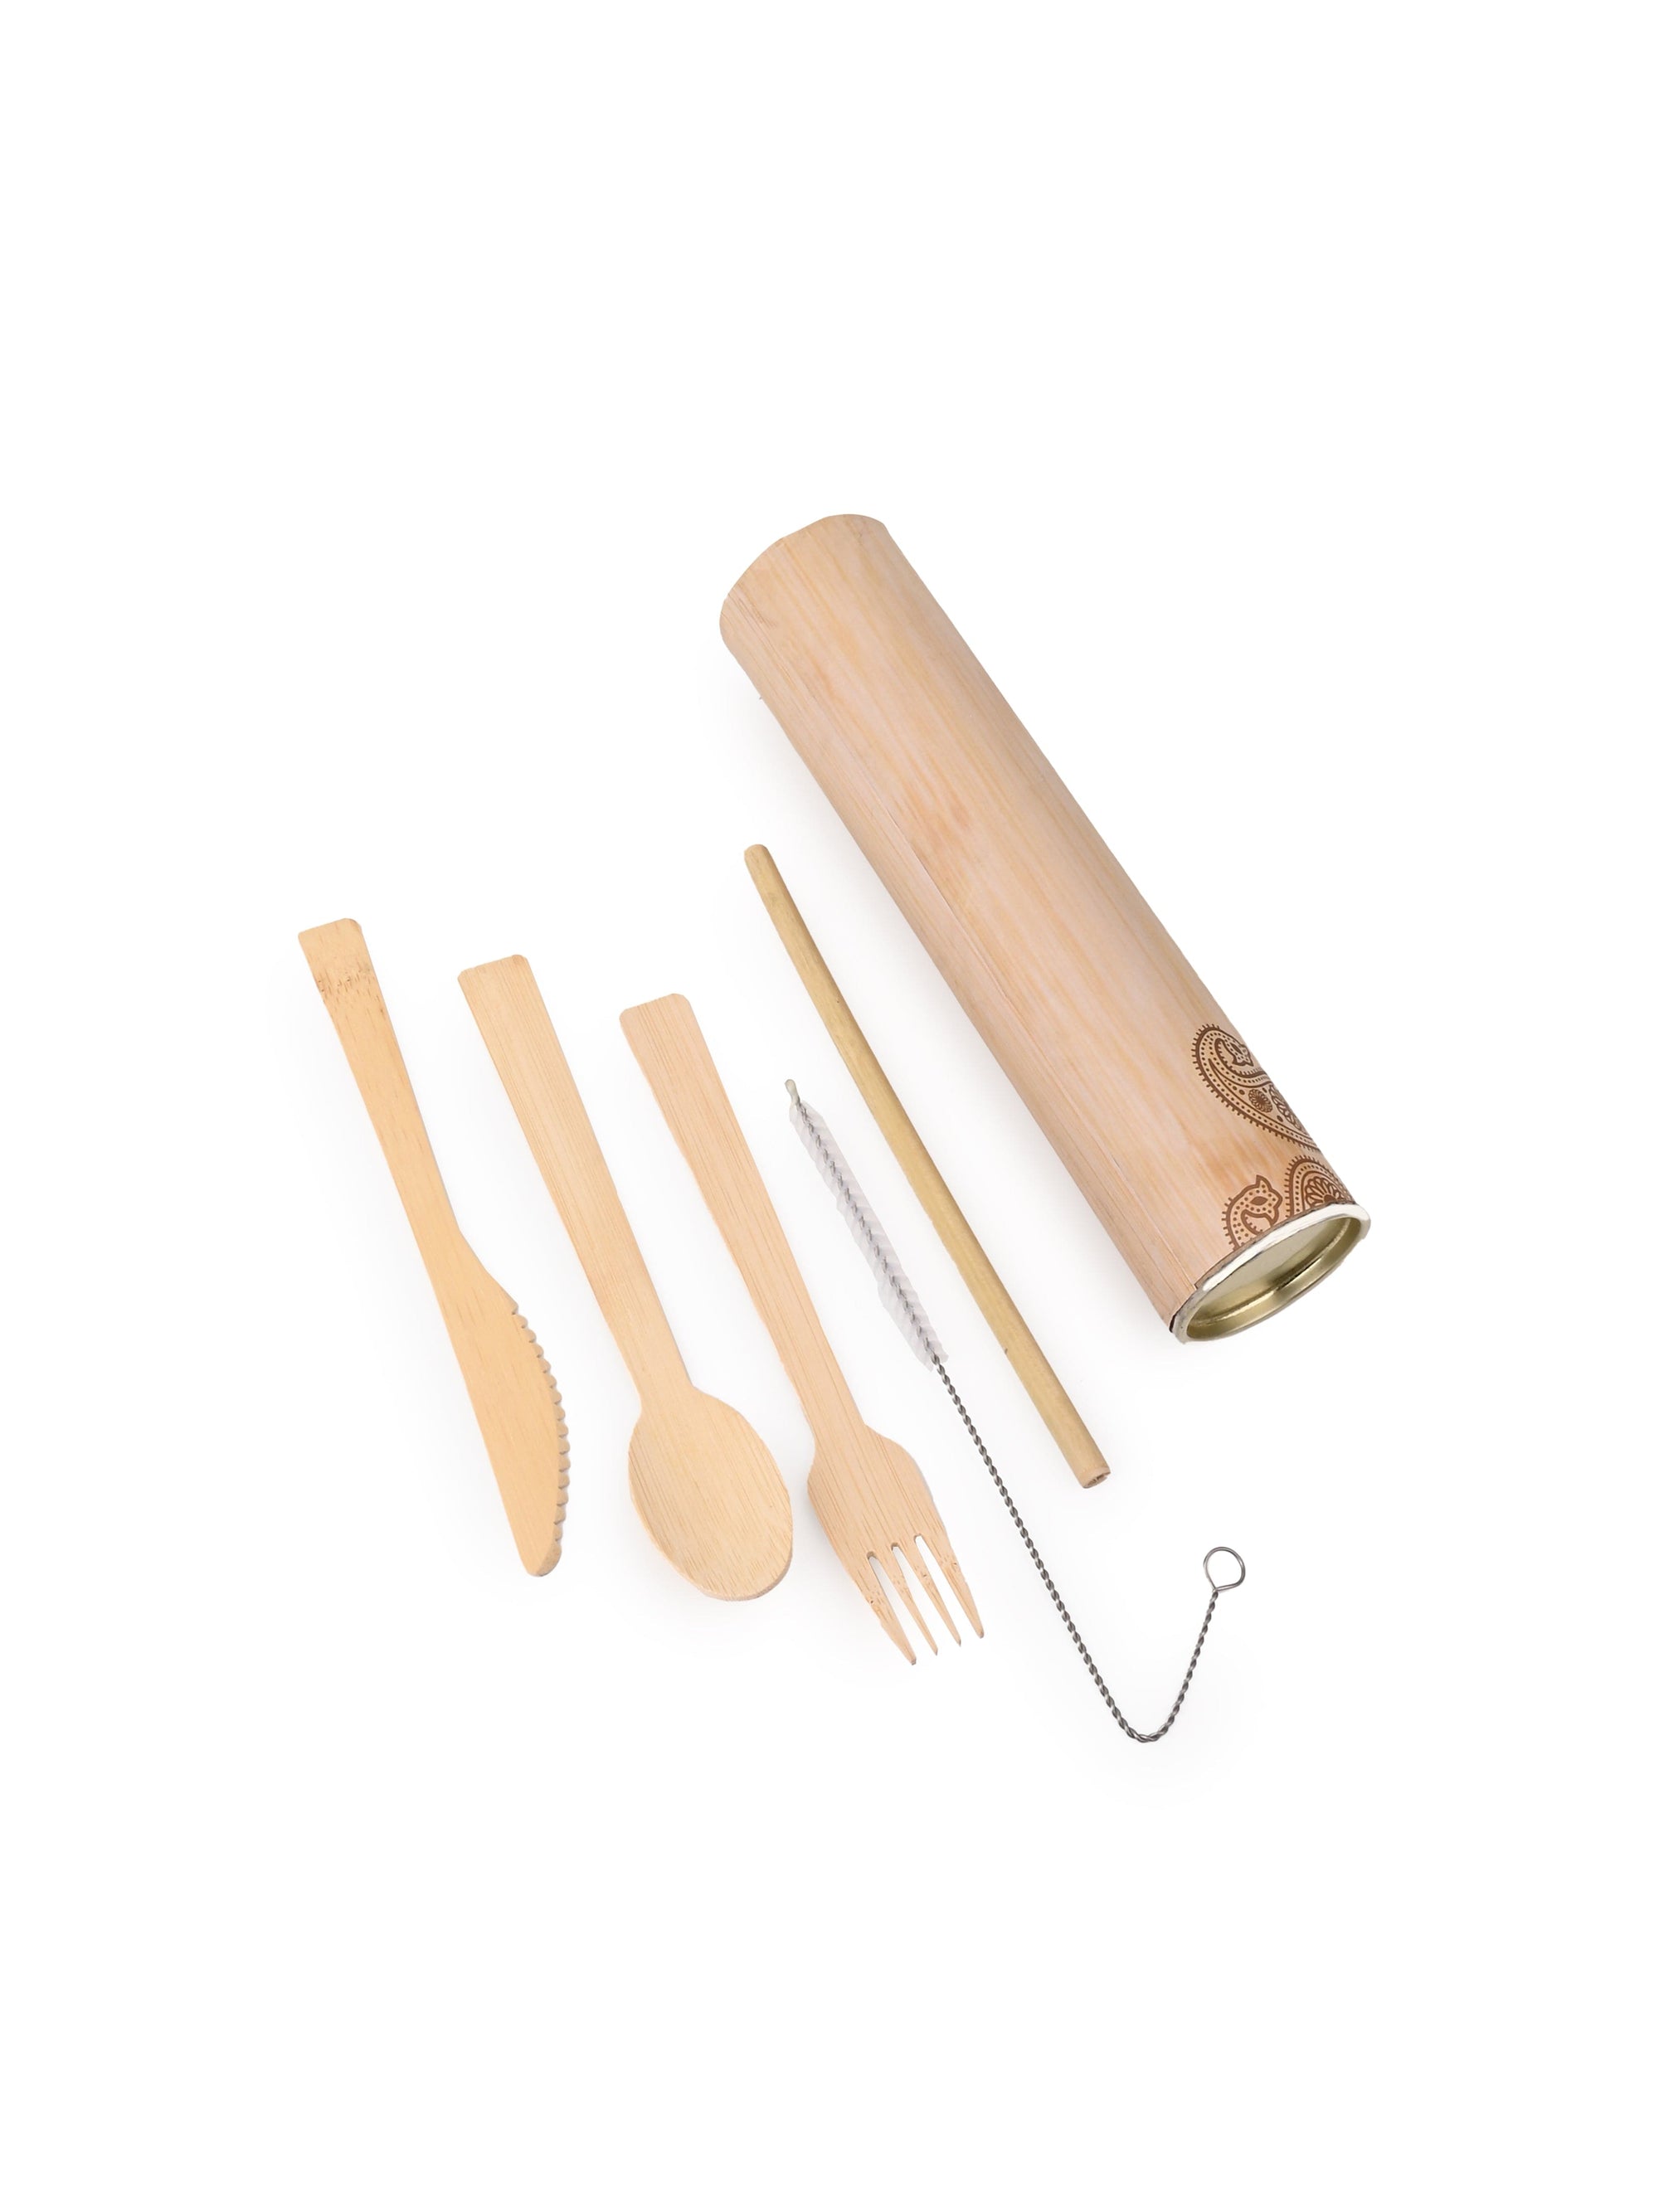 Handcrafted Sustainable Bamboo Cutlery Set in a Paper Box